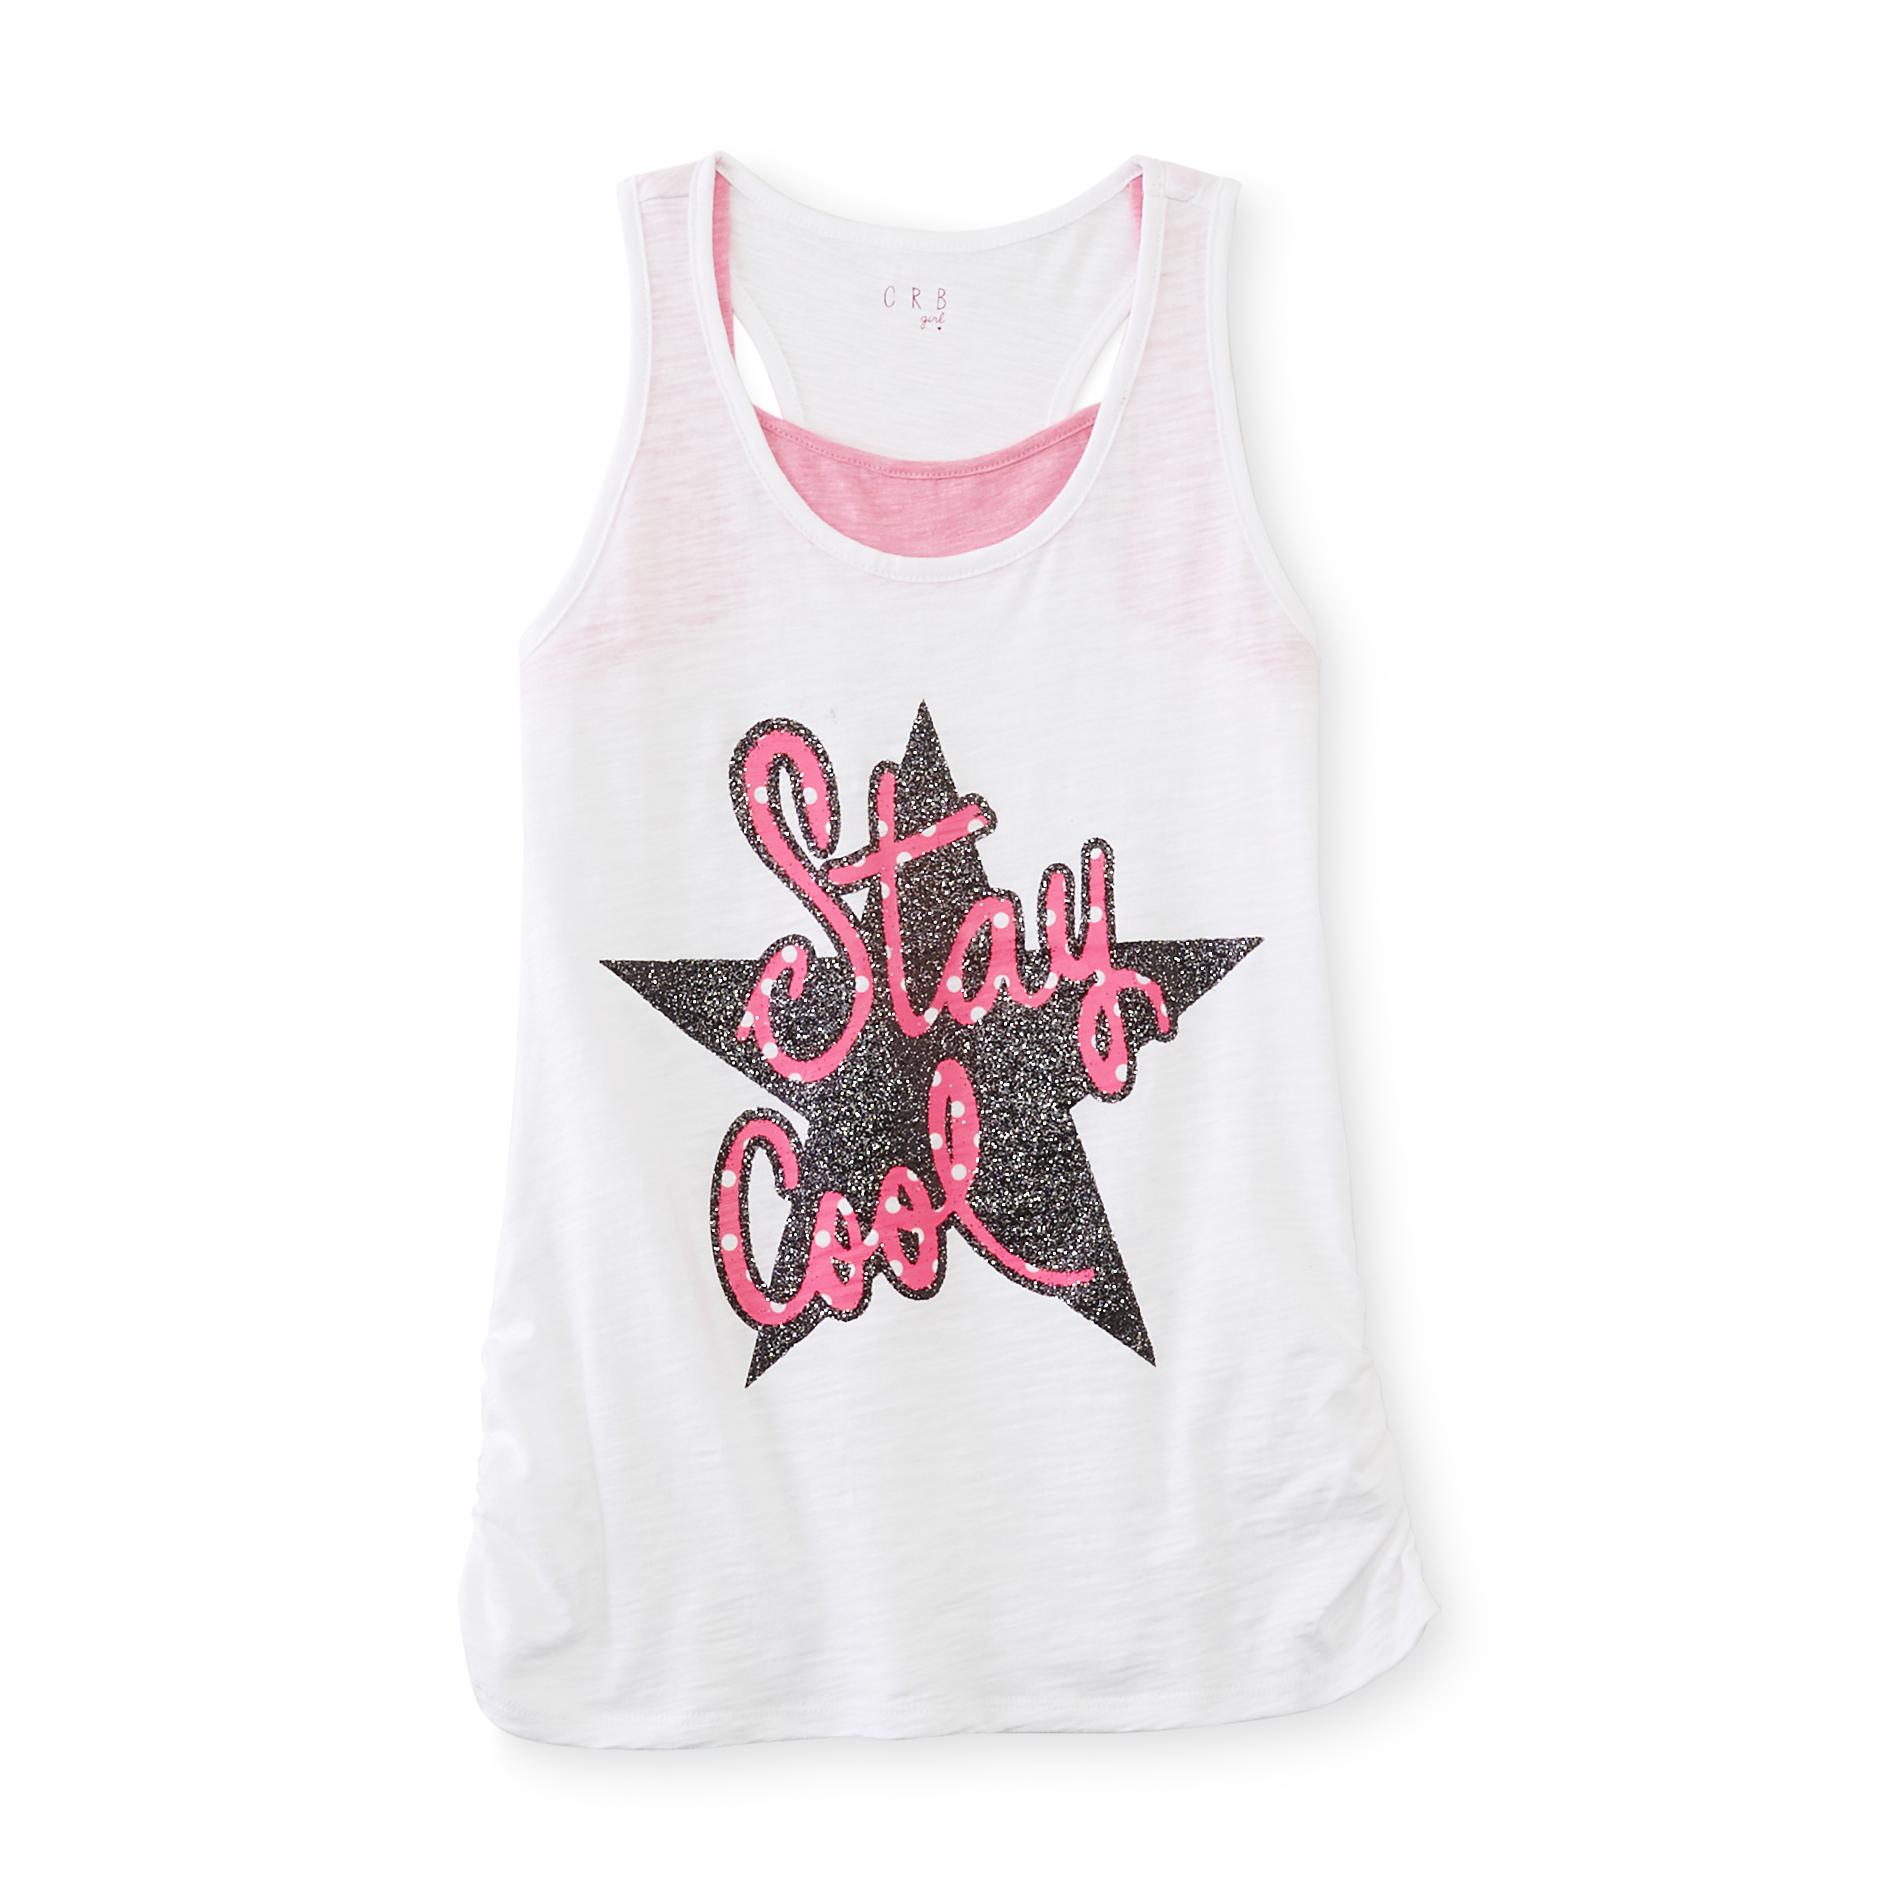 CRB Girl Girl's Graphic Tank Top - Stay Cool